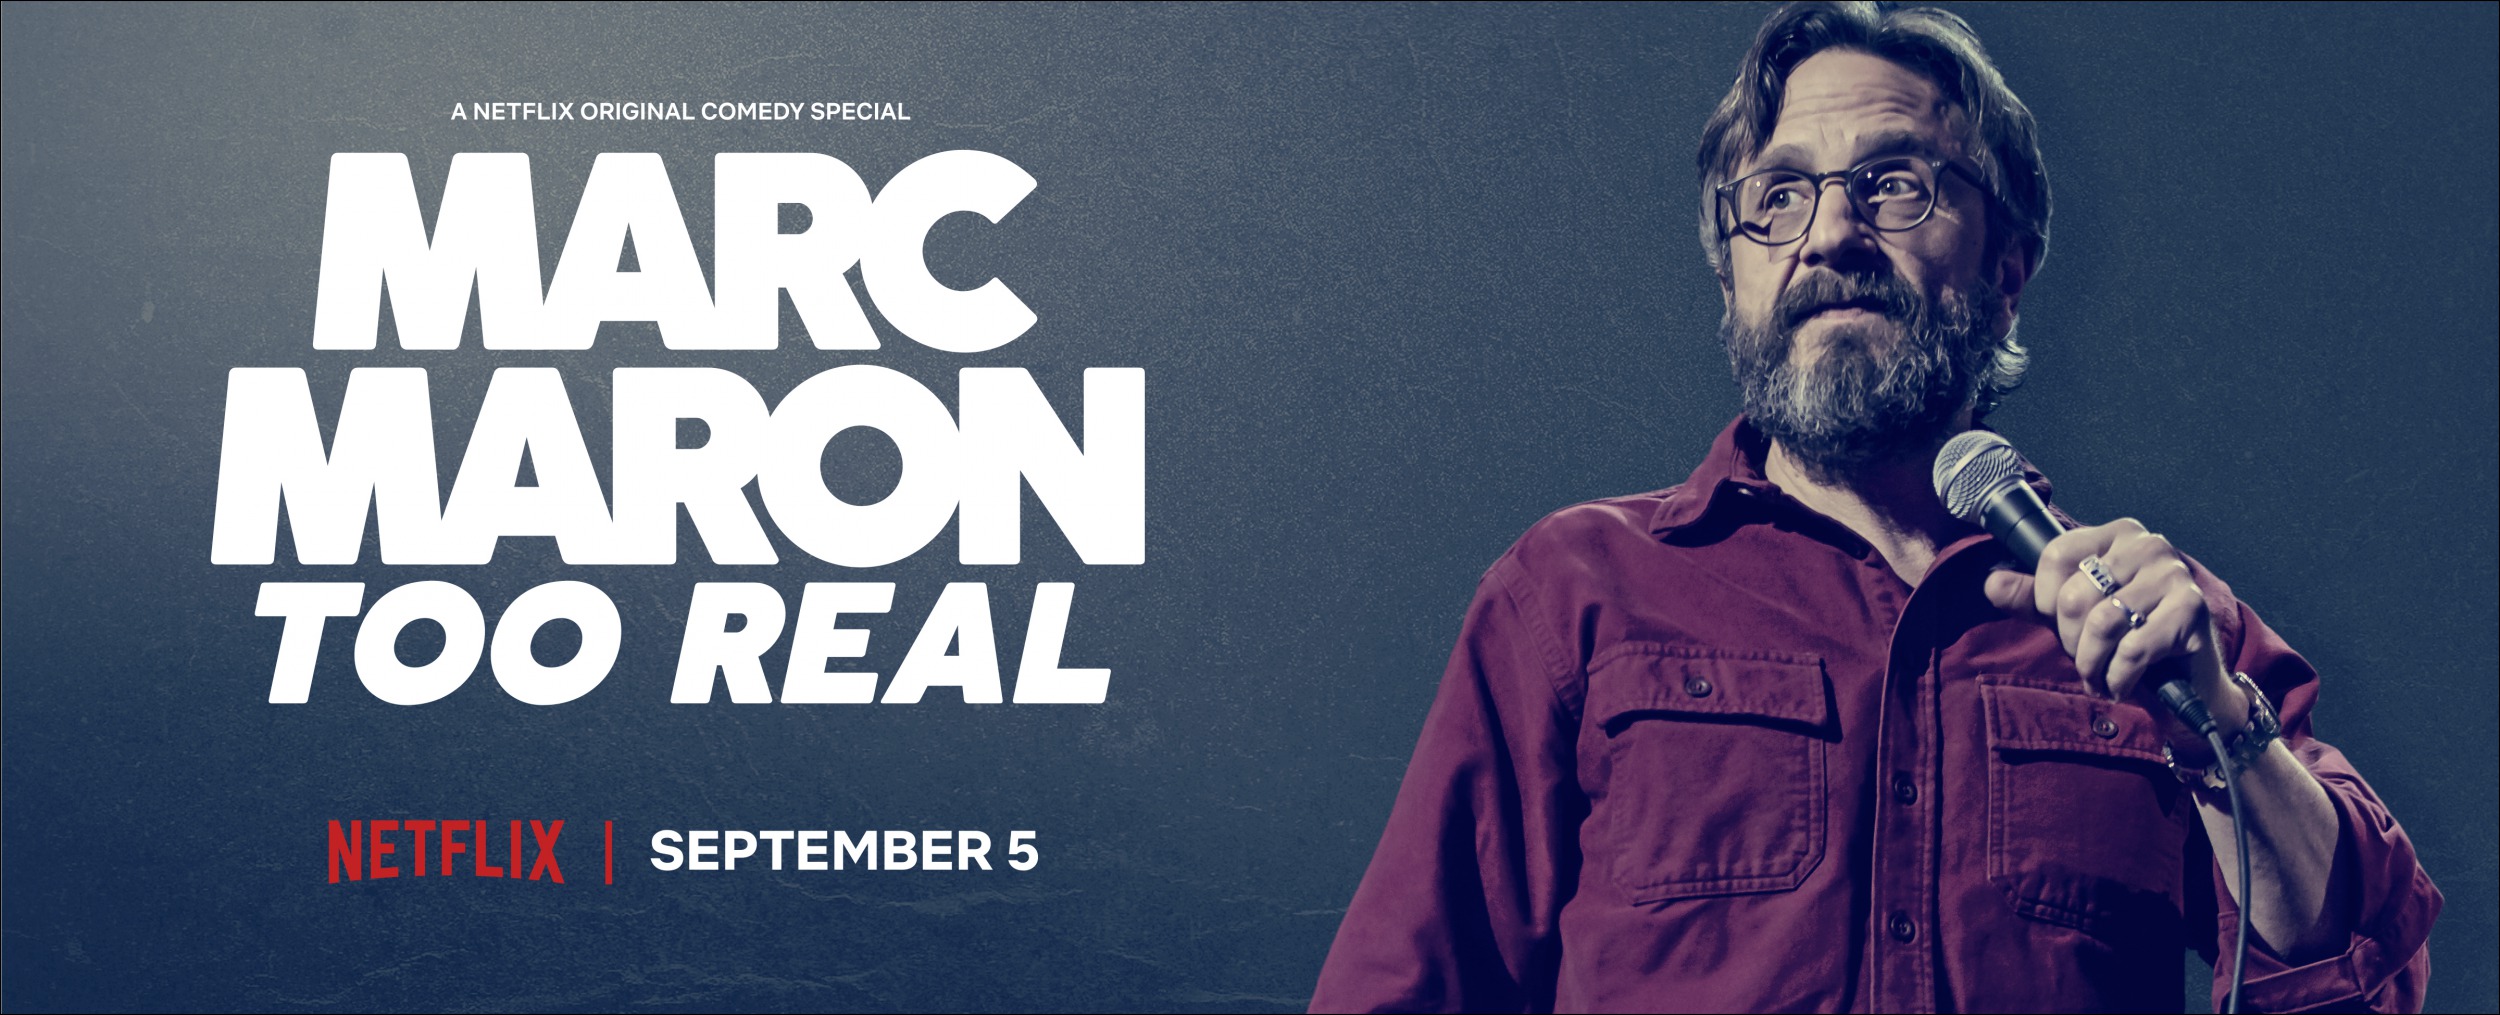 Mega Sized TV Poster Image for Marc Maron: Too Real 